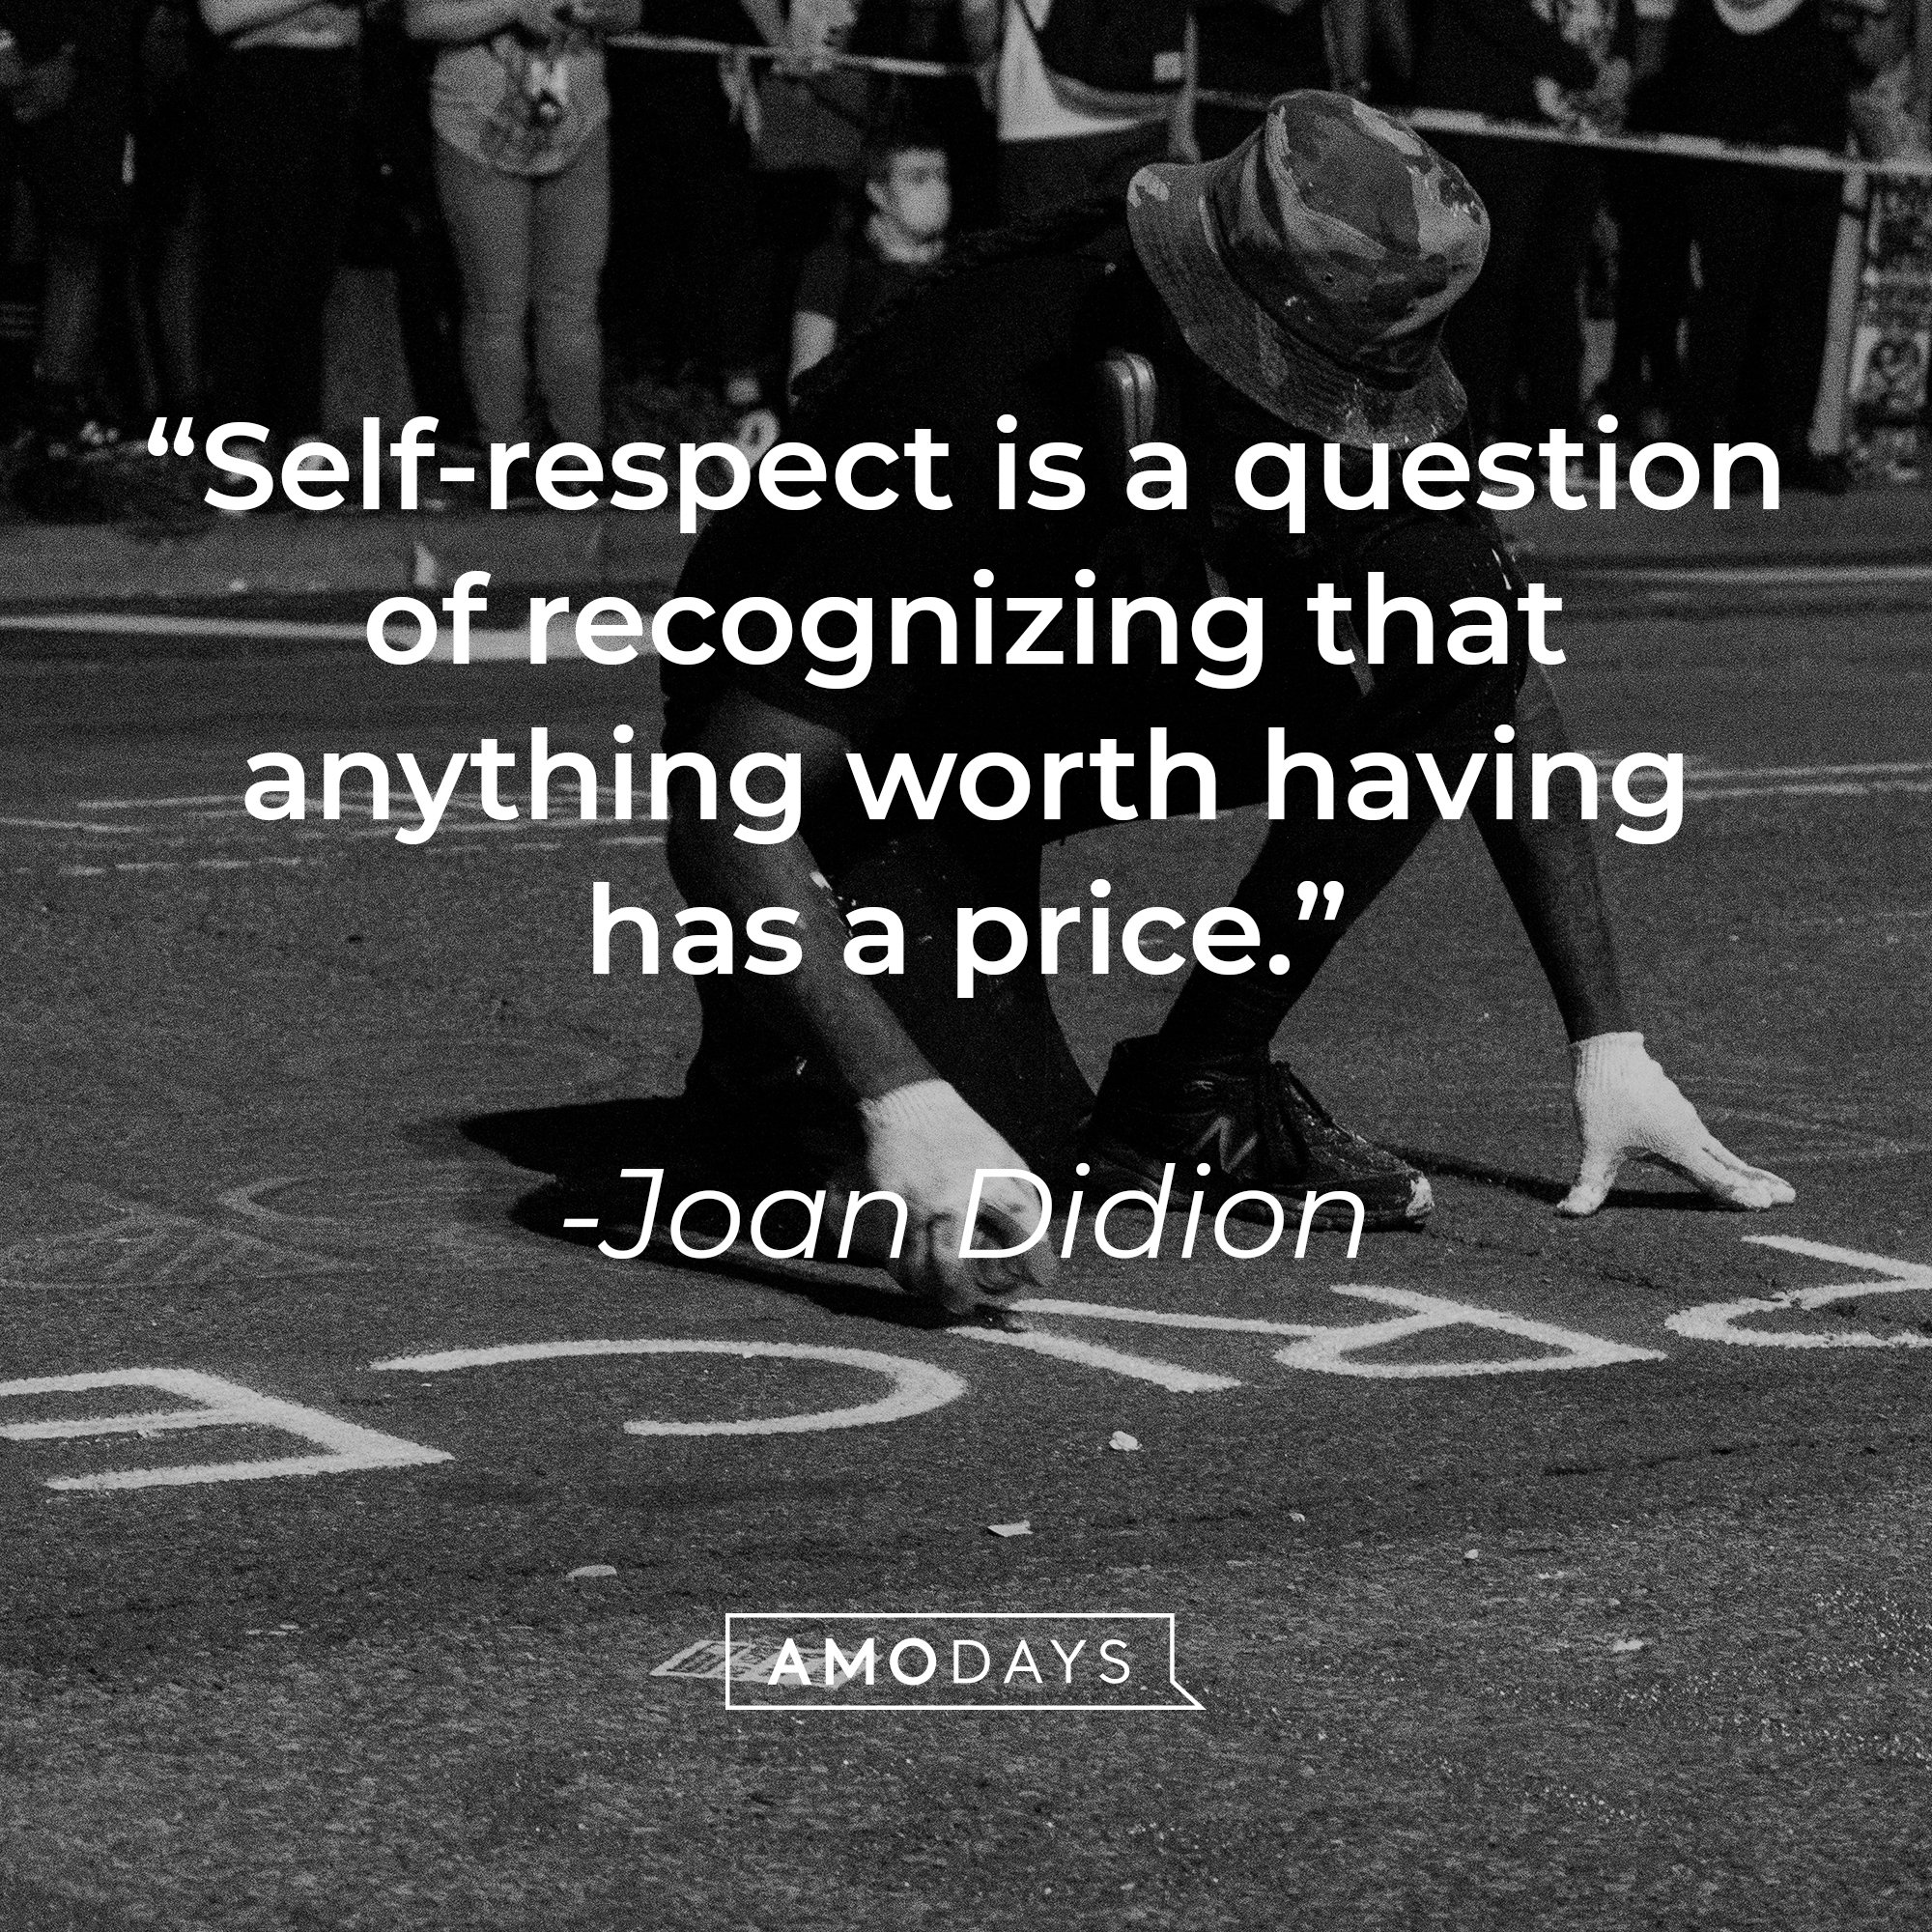 Joan Didion's quote: “Self-respect is a question of recognizing that anything worth having has a price.” | Image: AmoDays